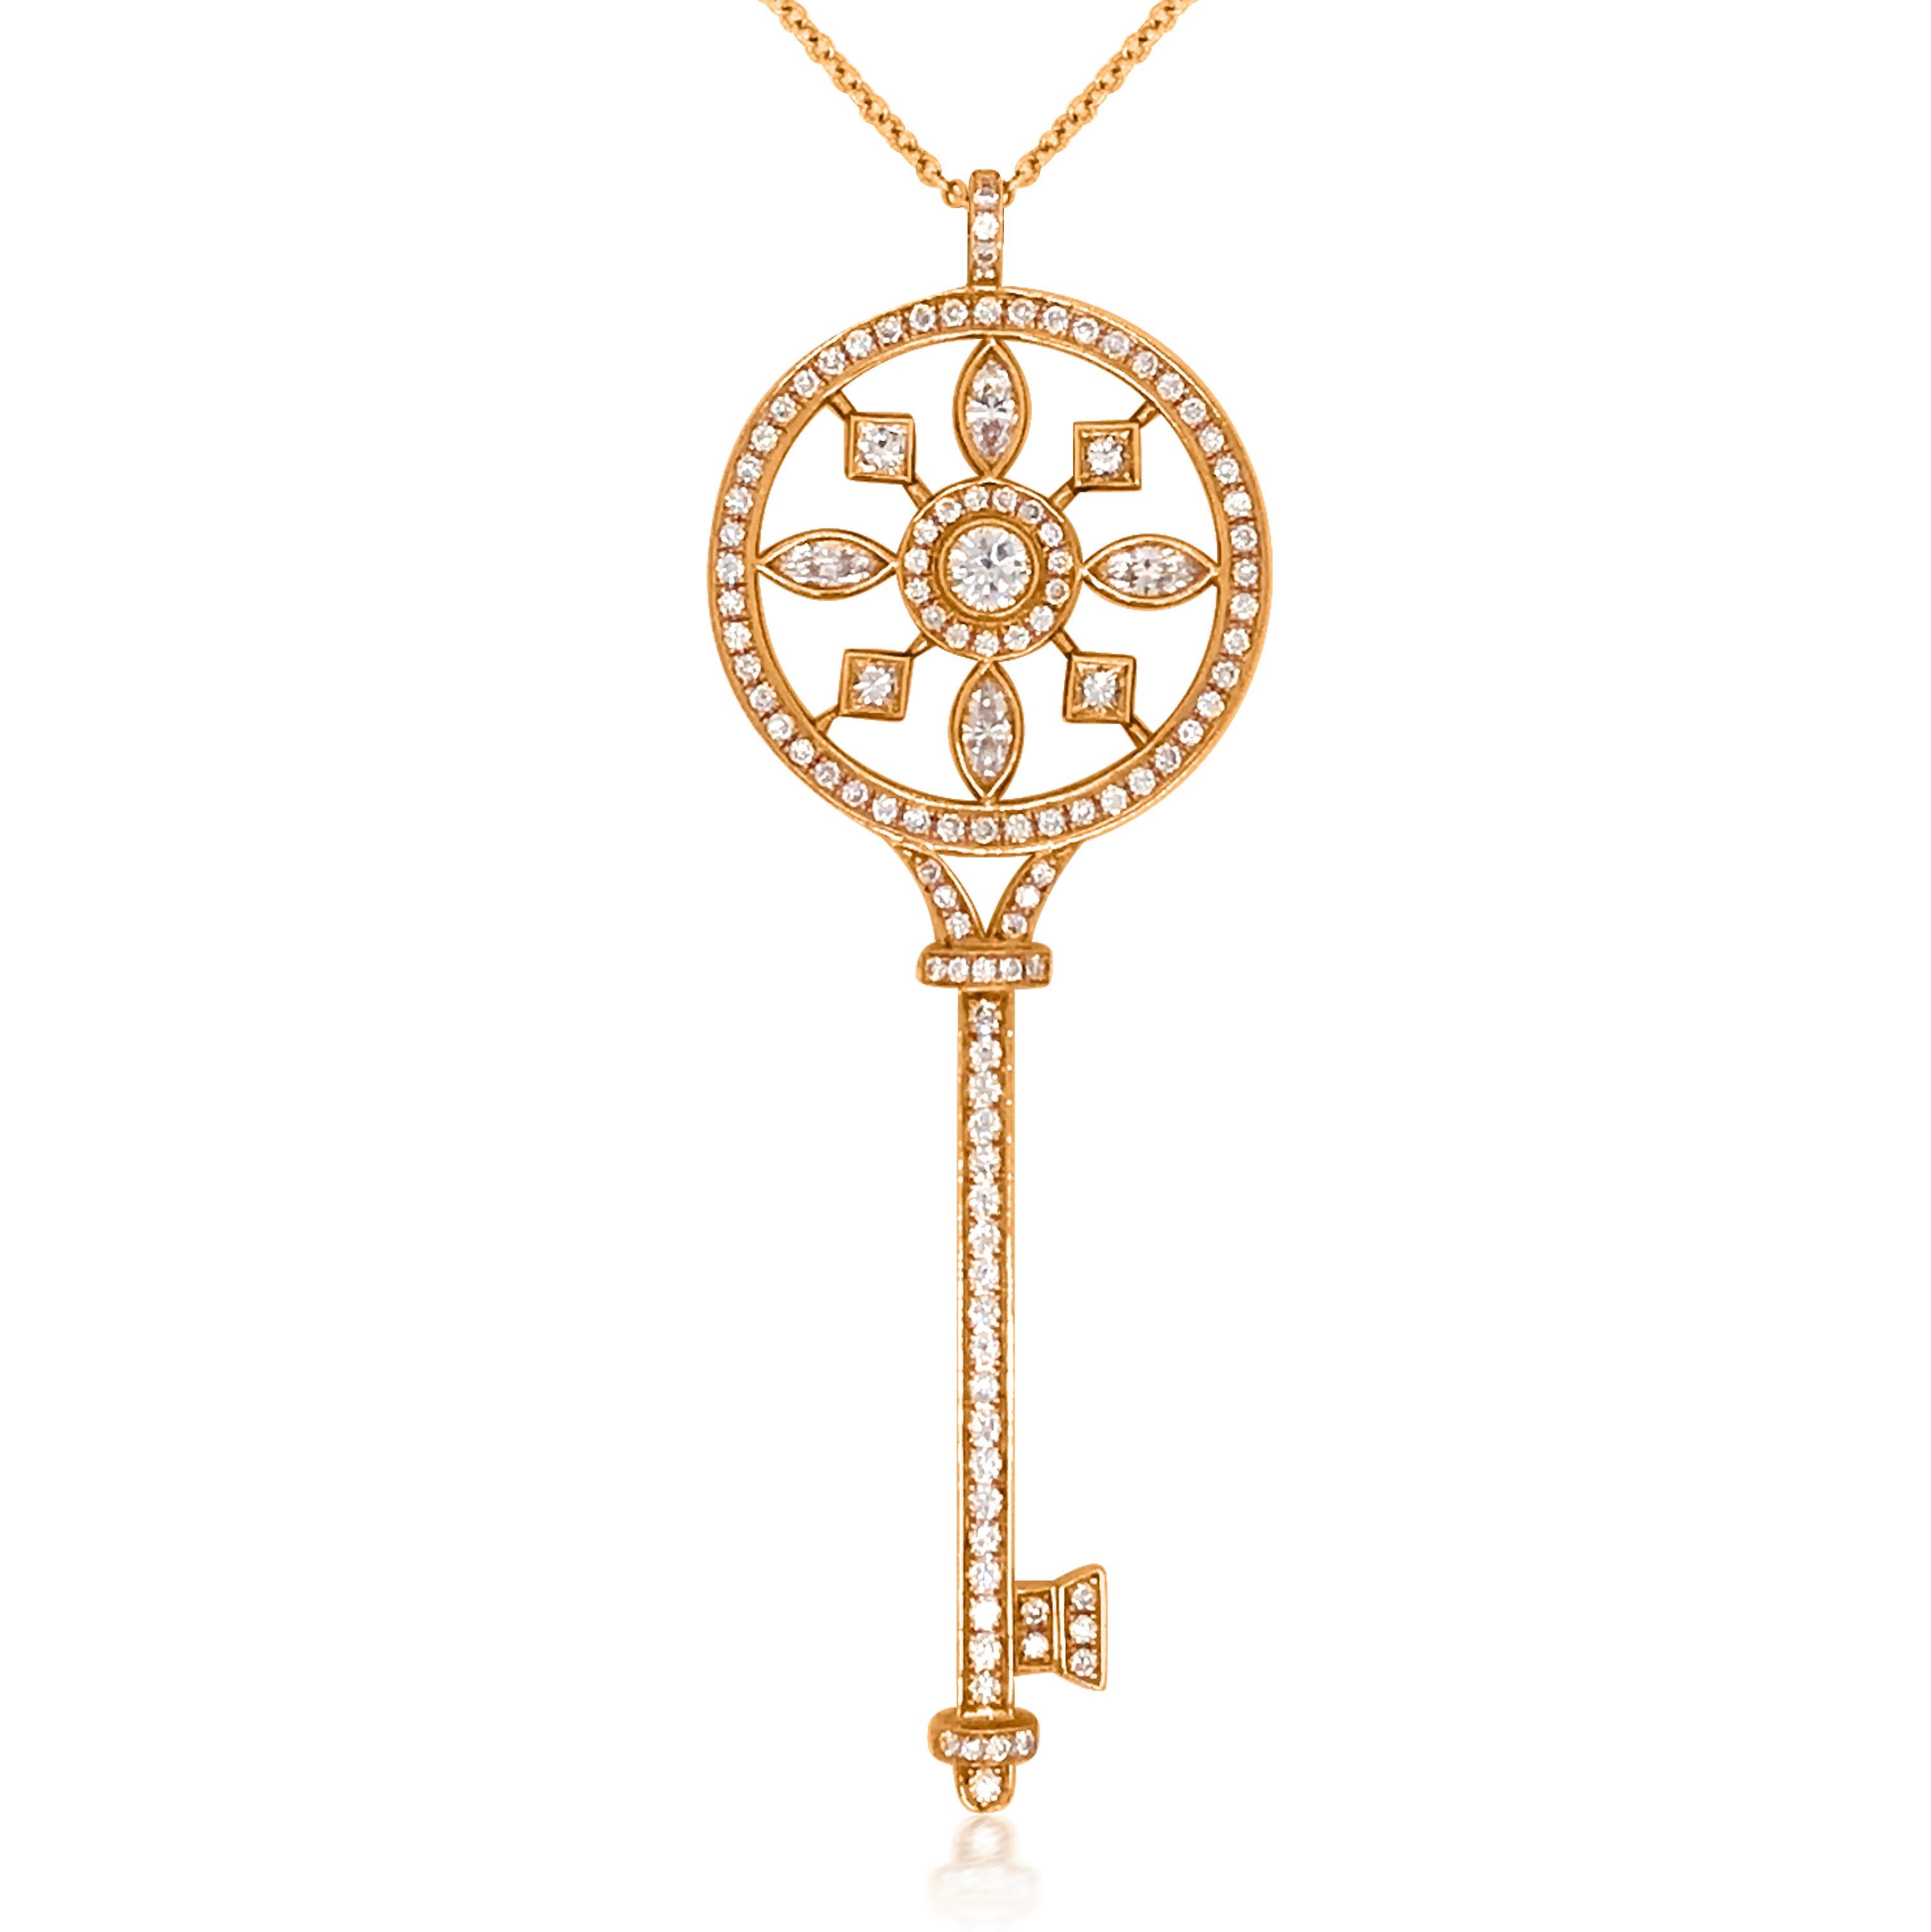 Brilliant beacons of optimism and hope, Tiffany Keys are radiant symbols of a bright future. This authentic Tiffany platinum key pendant glows with yellow diamonds, approx. 0.5ct, fancy light, illuminating the face. The necklace weighs 9.62 grams